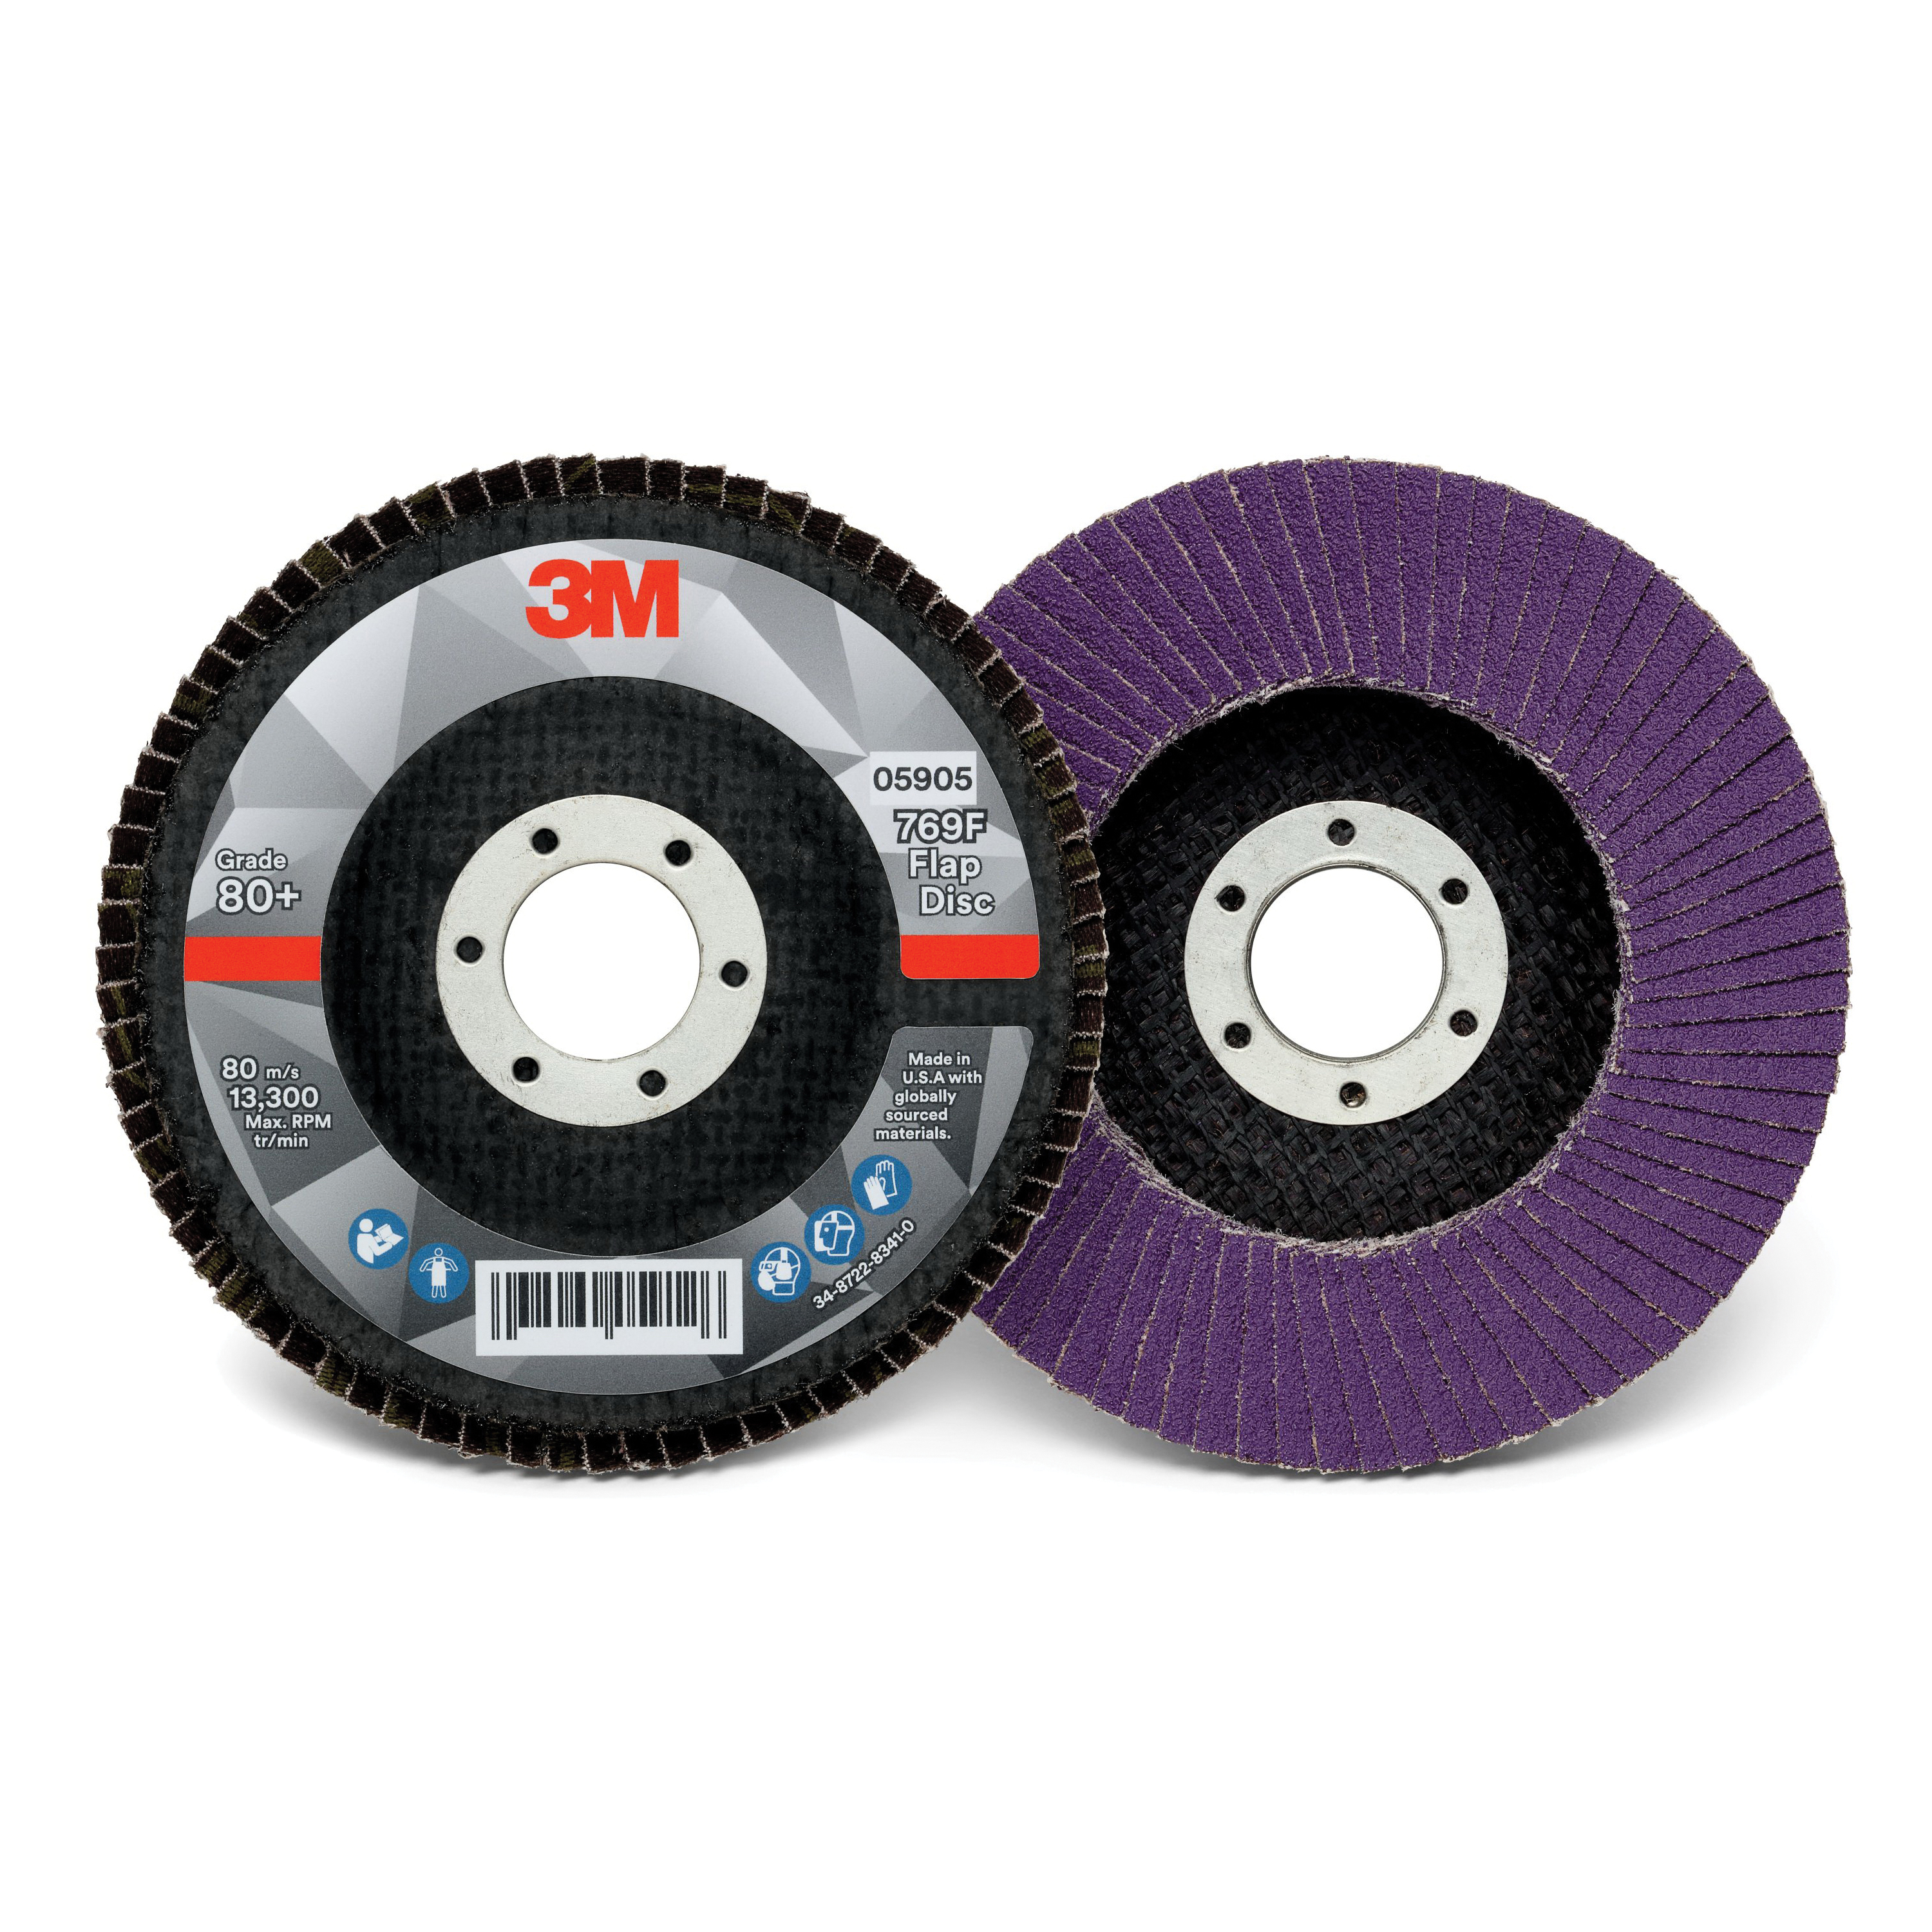 3M™ 038060-05905 Open Coated Abrasive Flap Disc, 4-1/2 in Dia, 7/8 in Center Hole, 80+ Grit, Precision Shaped Ceramic Abrasive, Type 27 Disc